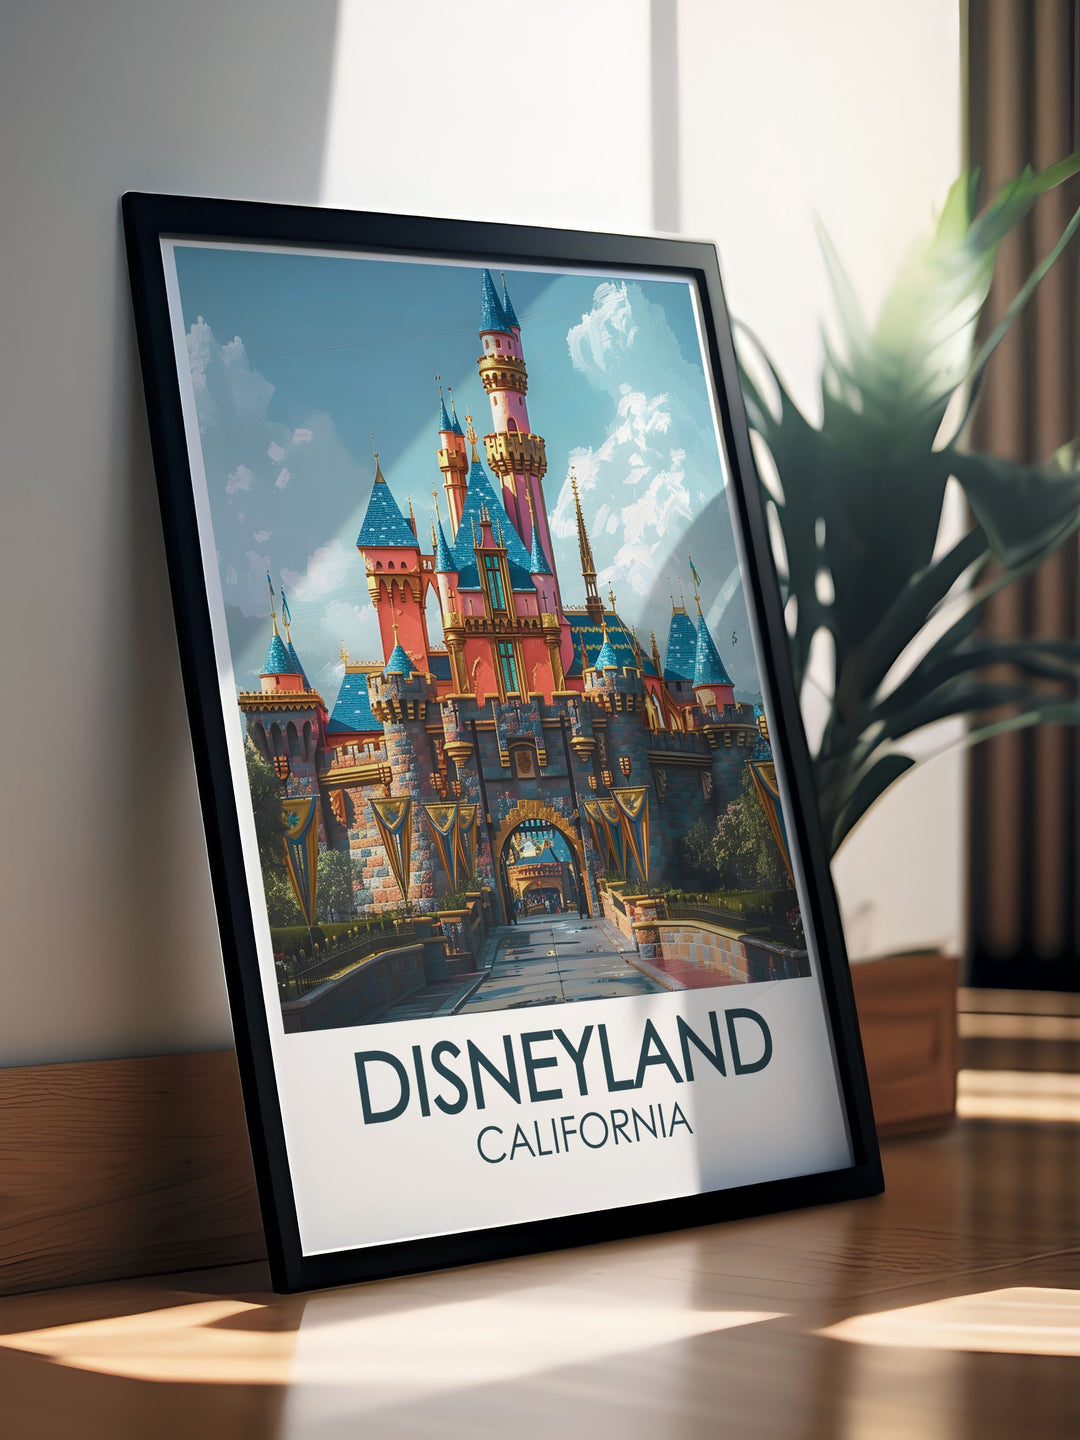 The iconic Disneyland Resort Anaheim is beautifully depicted in this travel poster, showcasing the thrilling rides and beloved characters that make this destination a dream come true for visitors of all ages. Bring the magic of Disneyland into your living space with this stunning artwork.